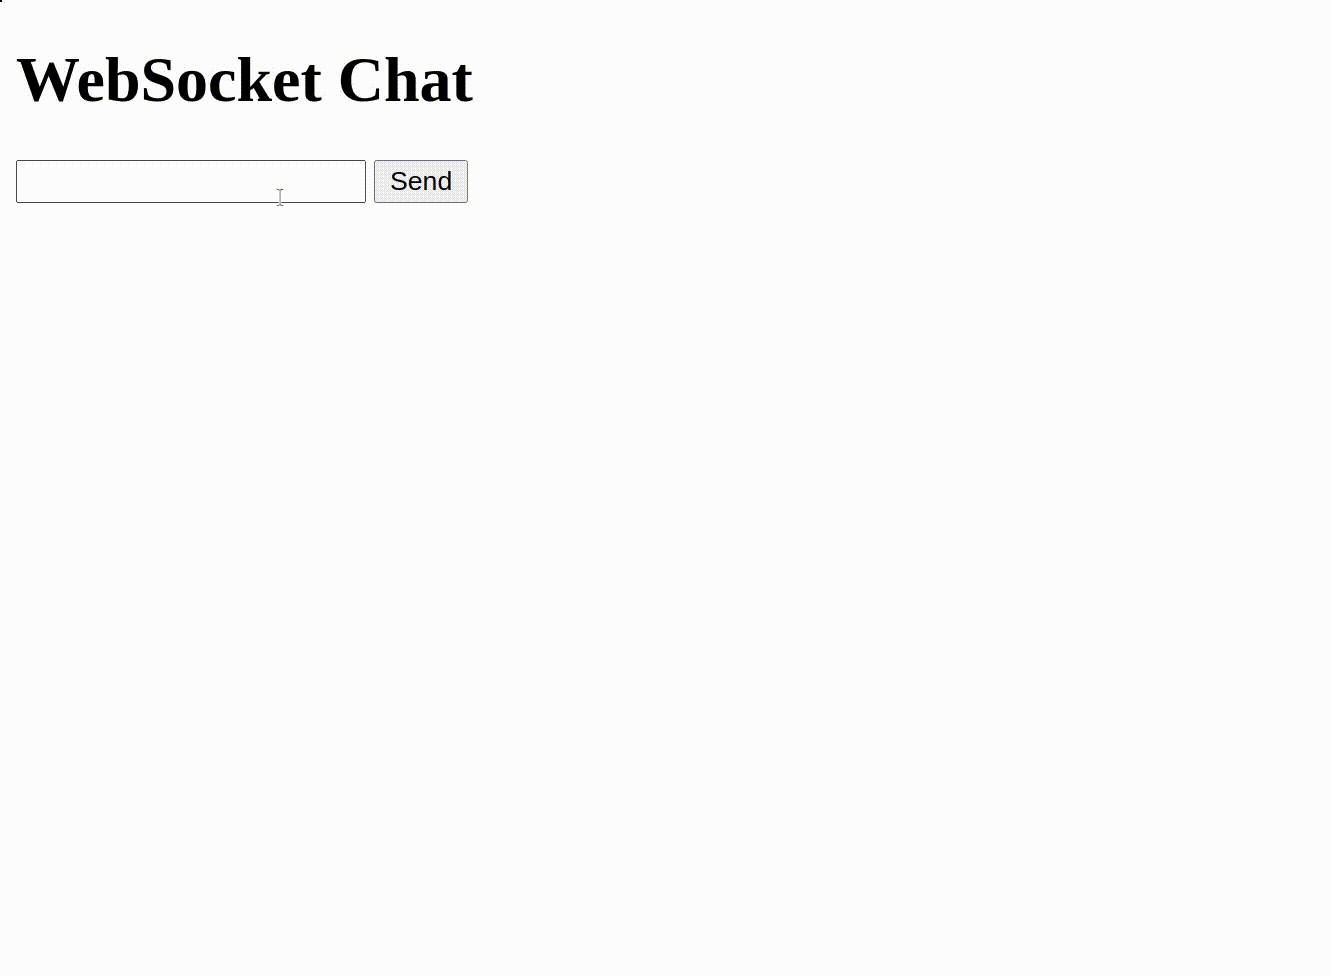 A gif showing the websocket chat application working